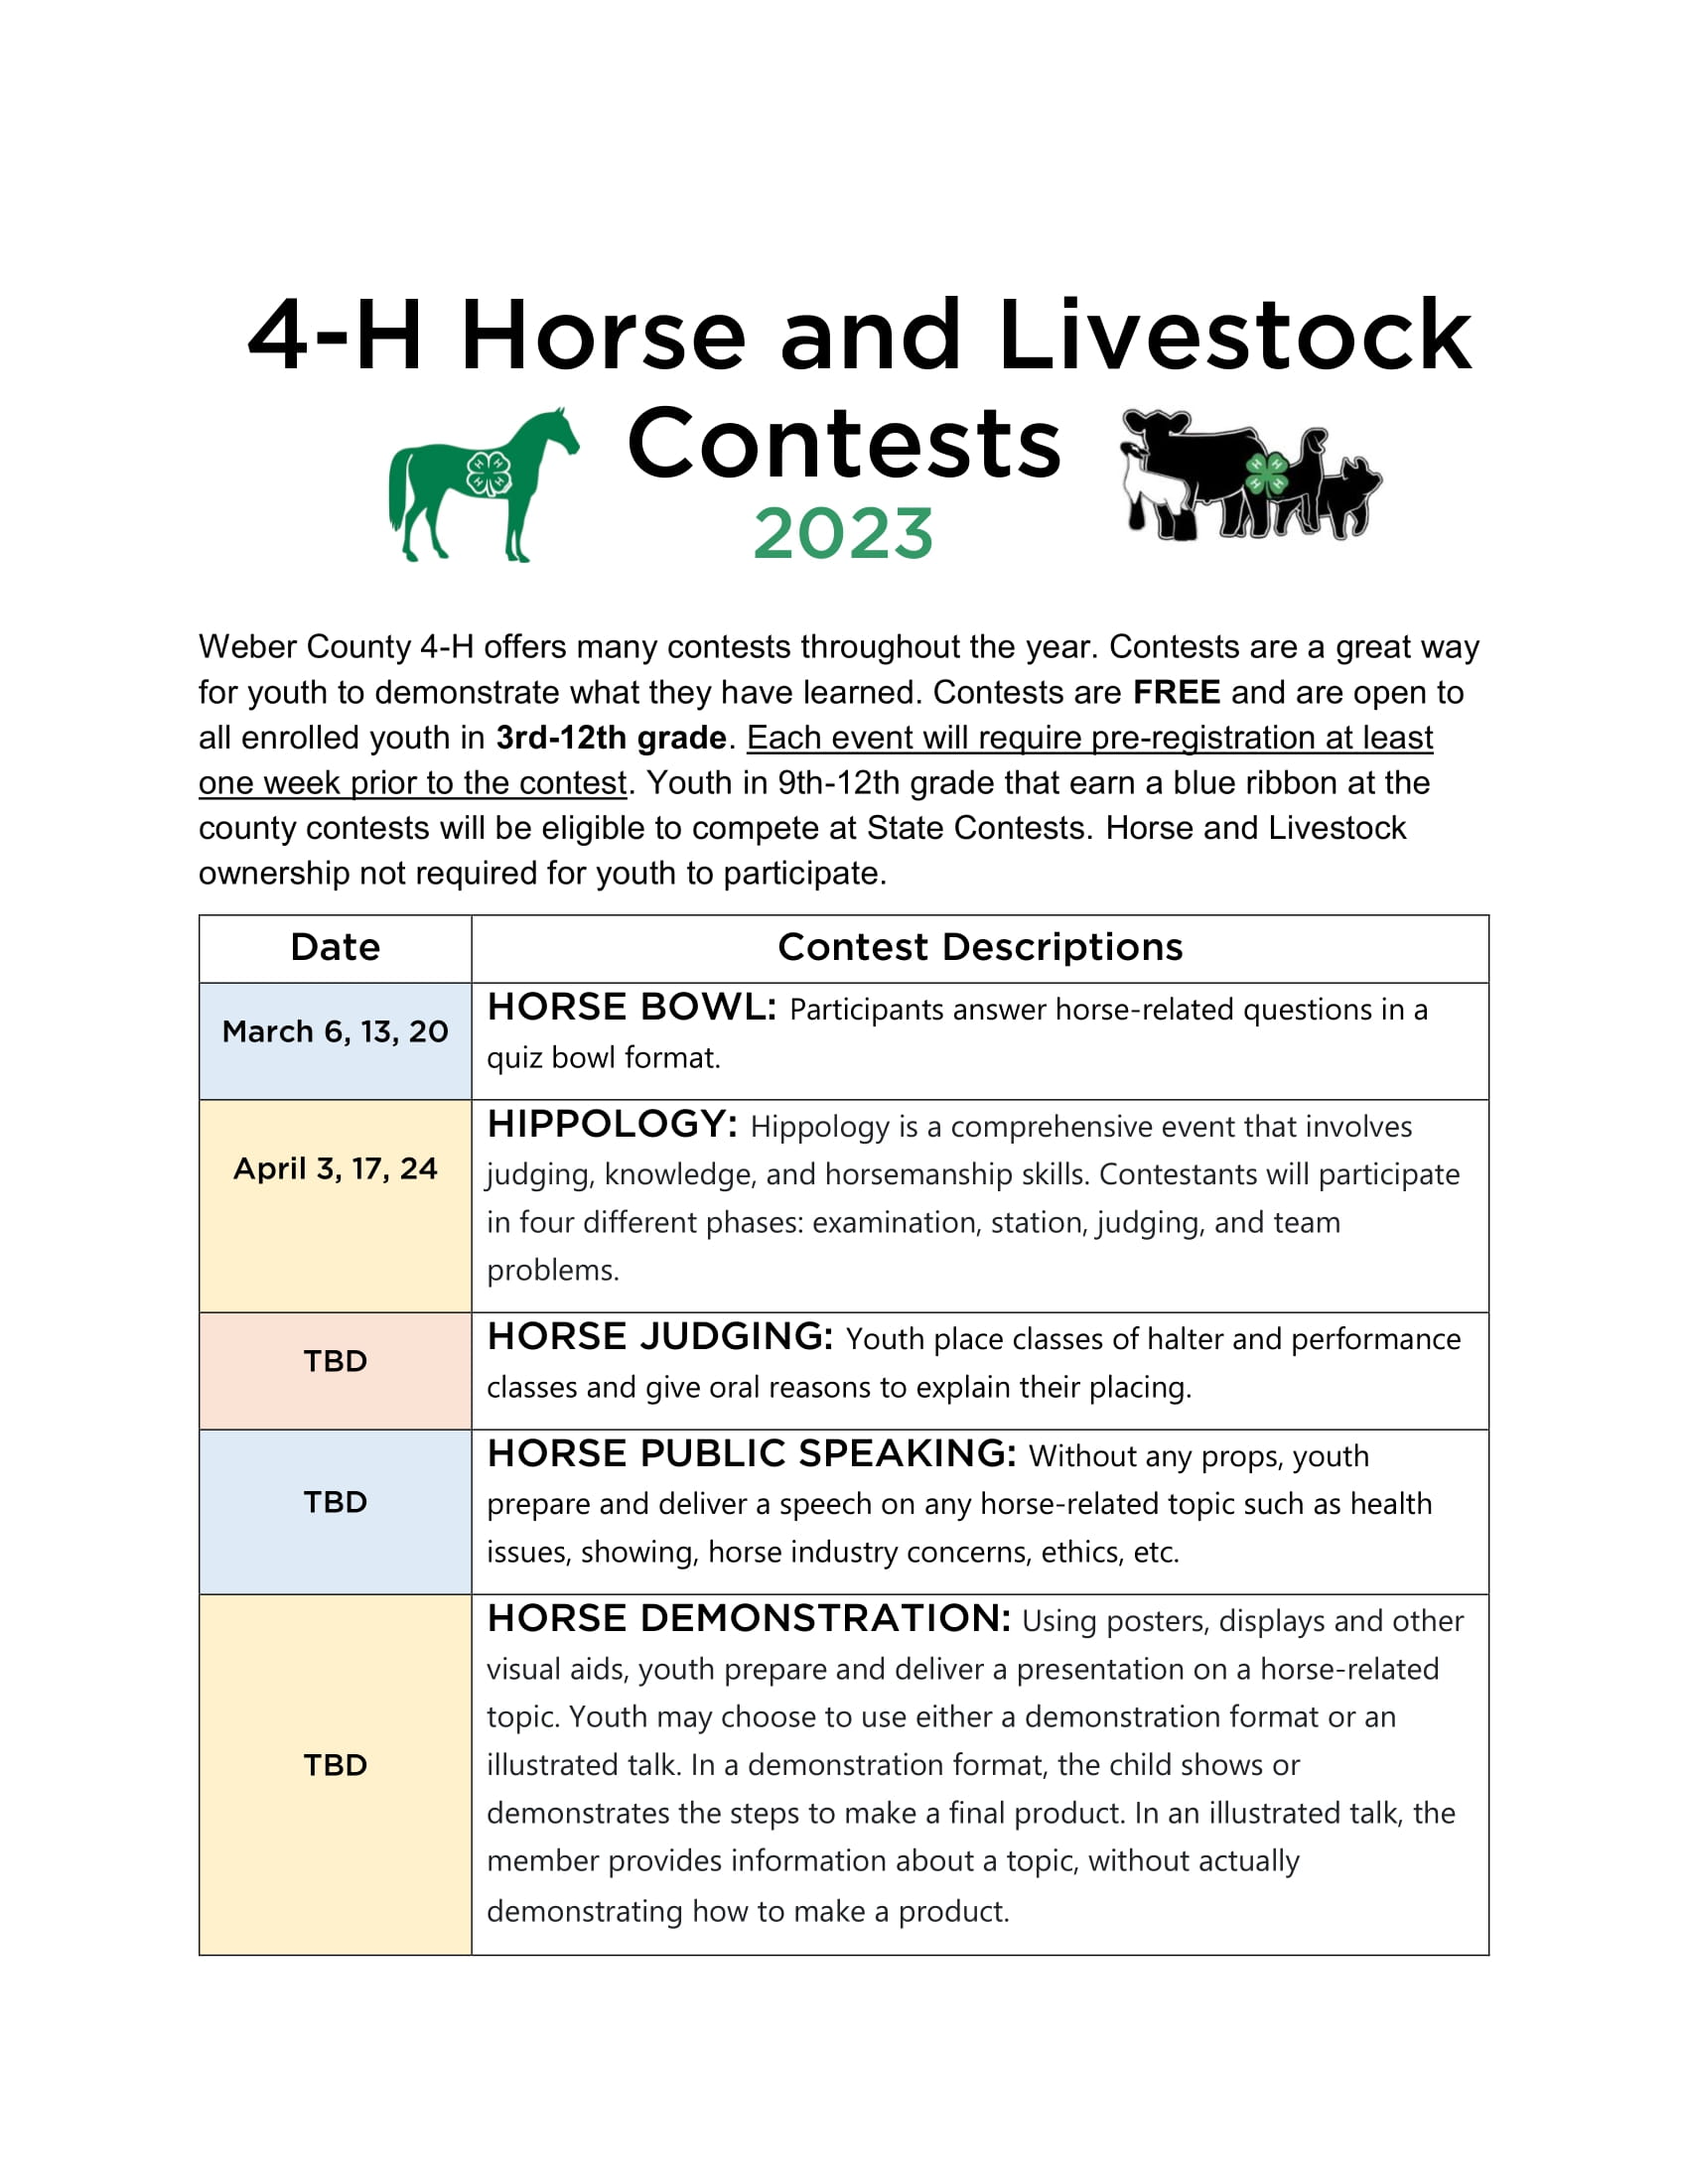 Horse and Livestock 2023 Contest